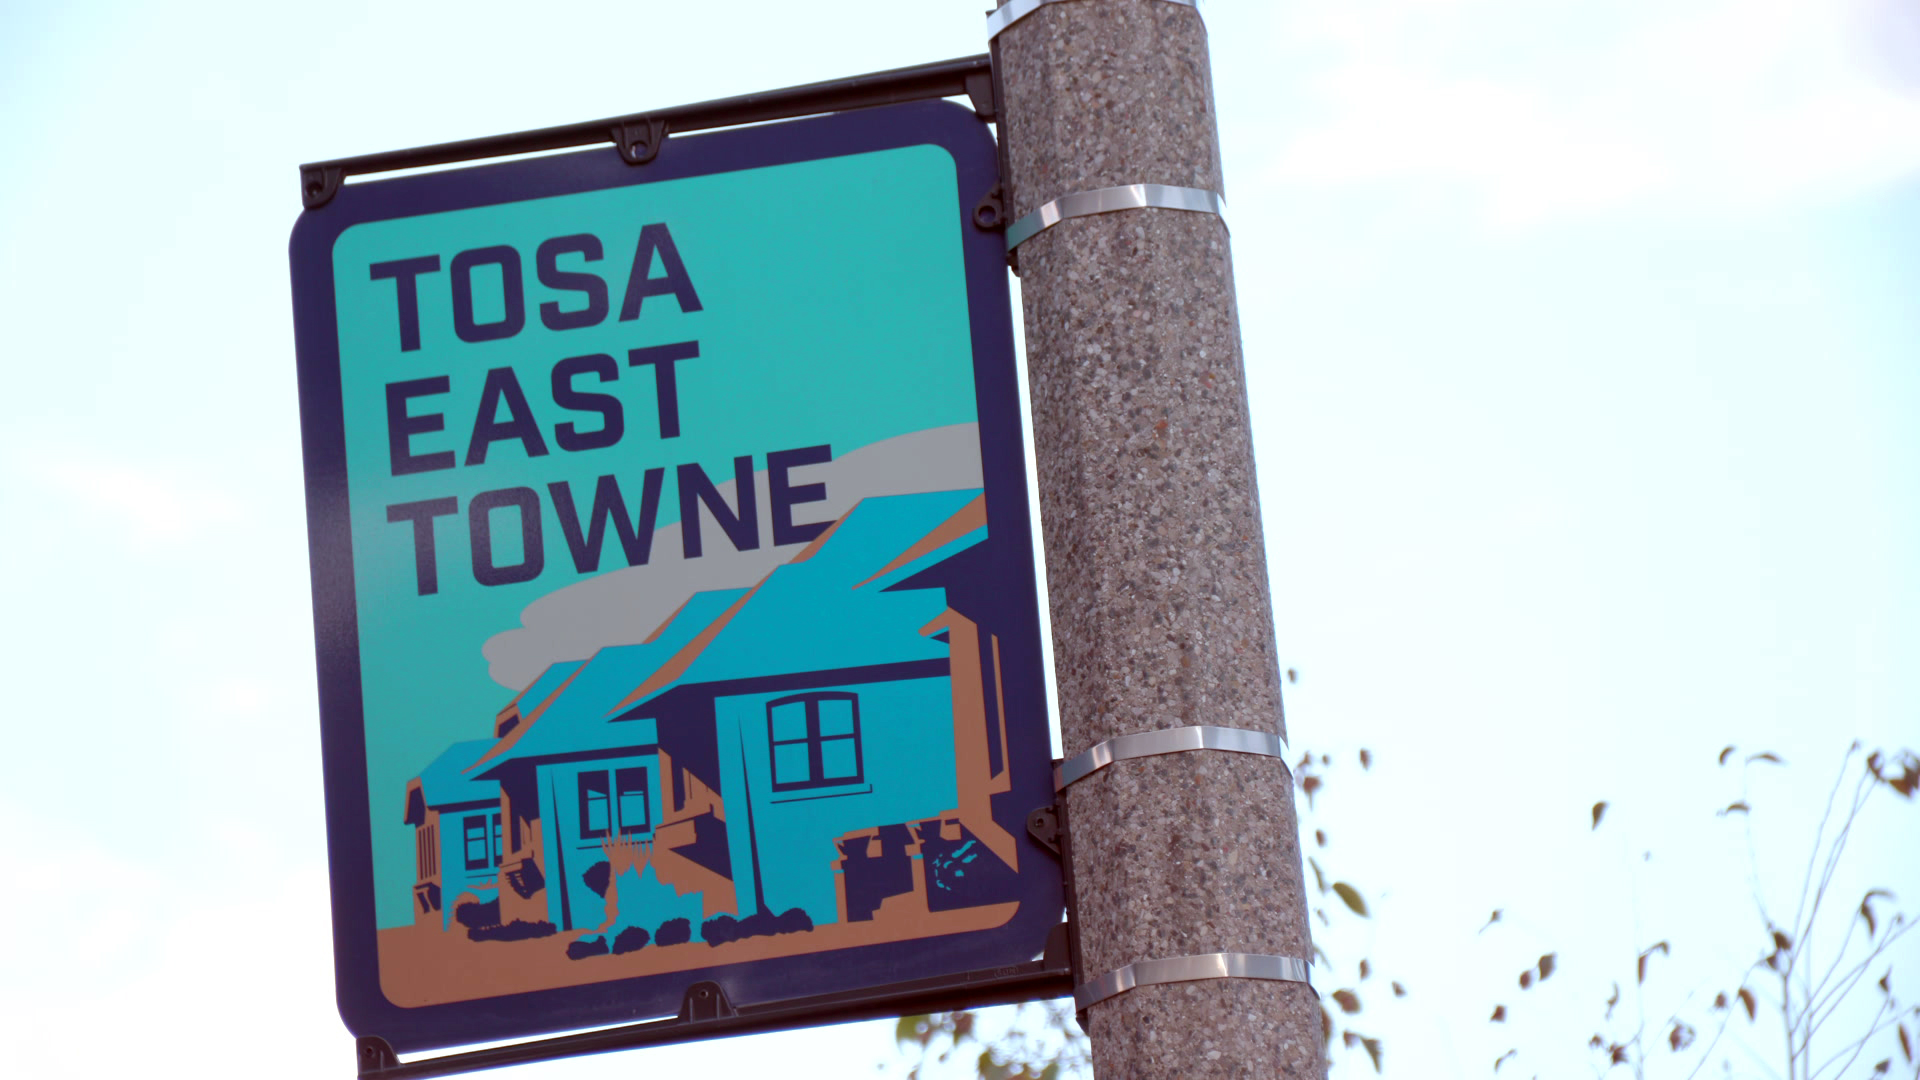 A sign with the words "Tosa East Towne" and a graphic of a row of houses is mounted with metal attachment rings to a stone pillar.